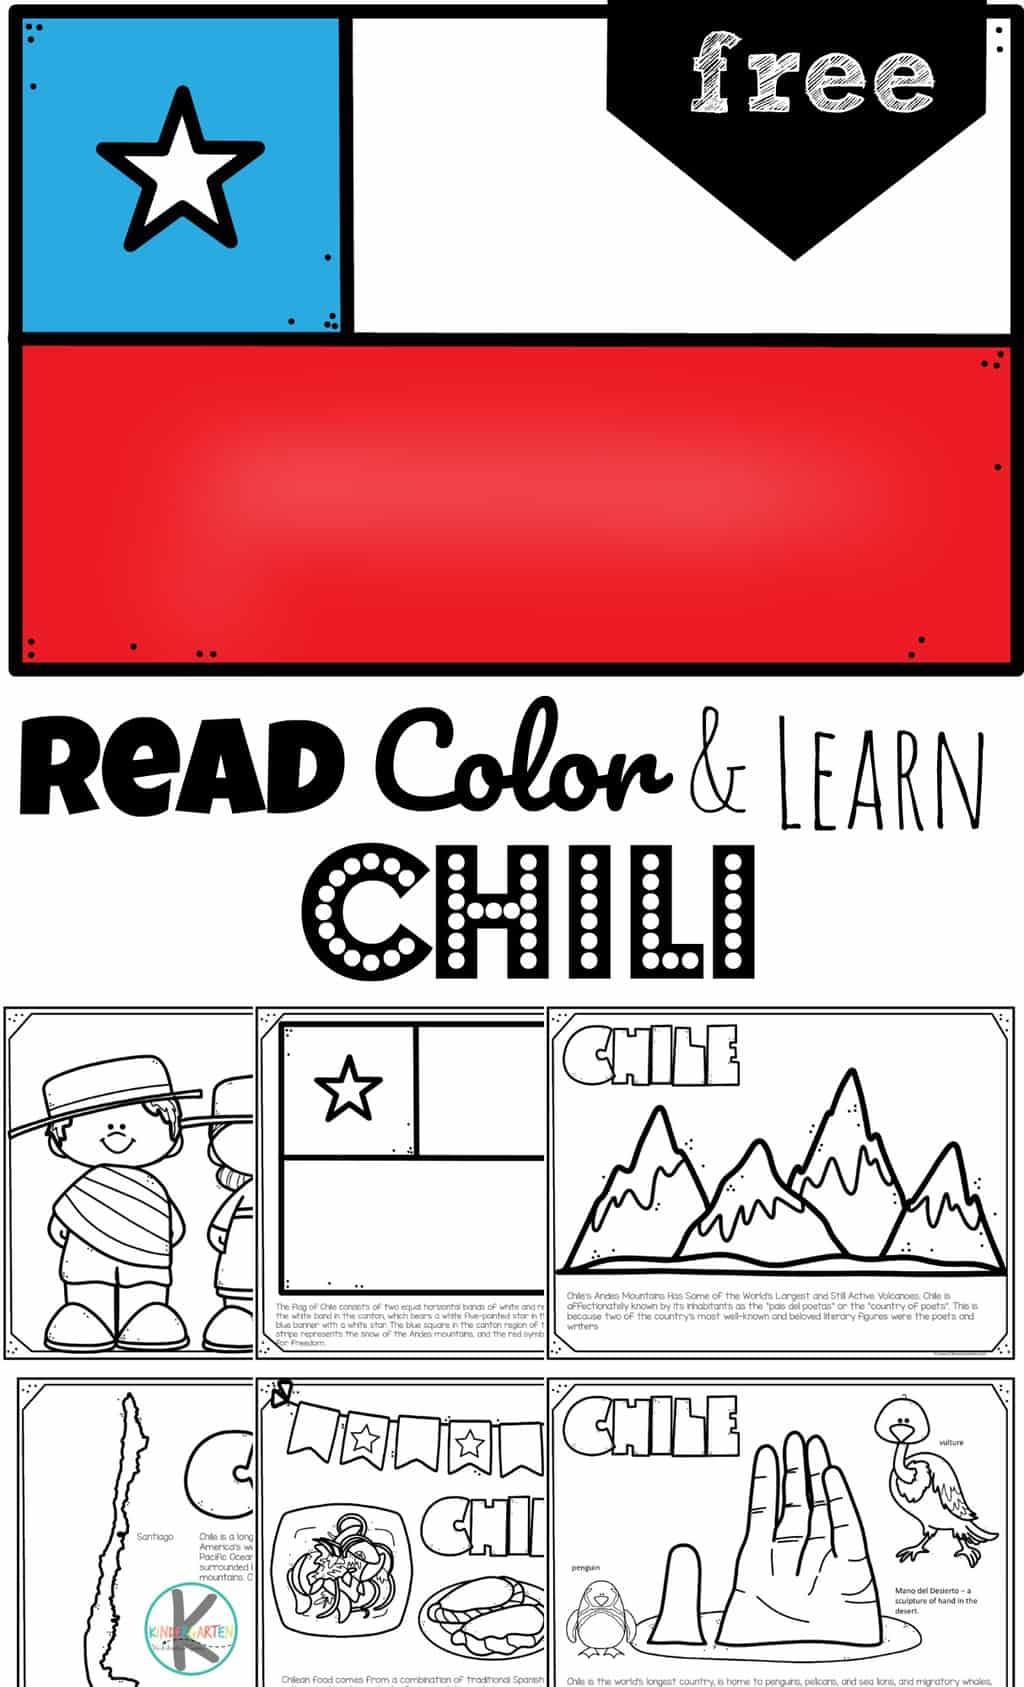 Free chile coloring pages